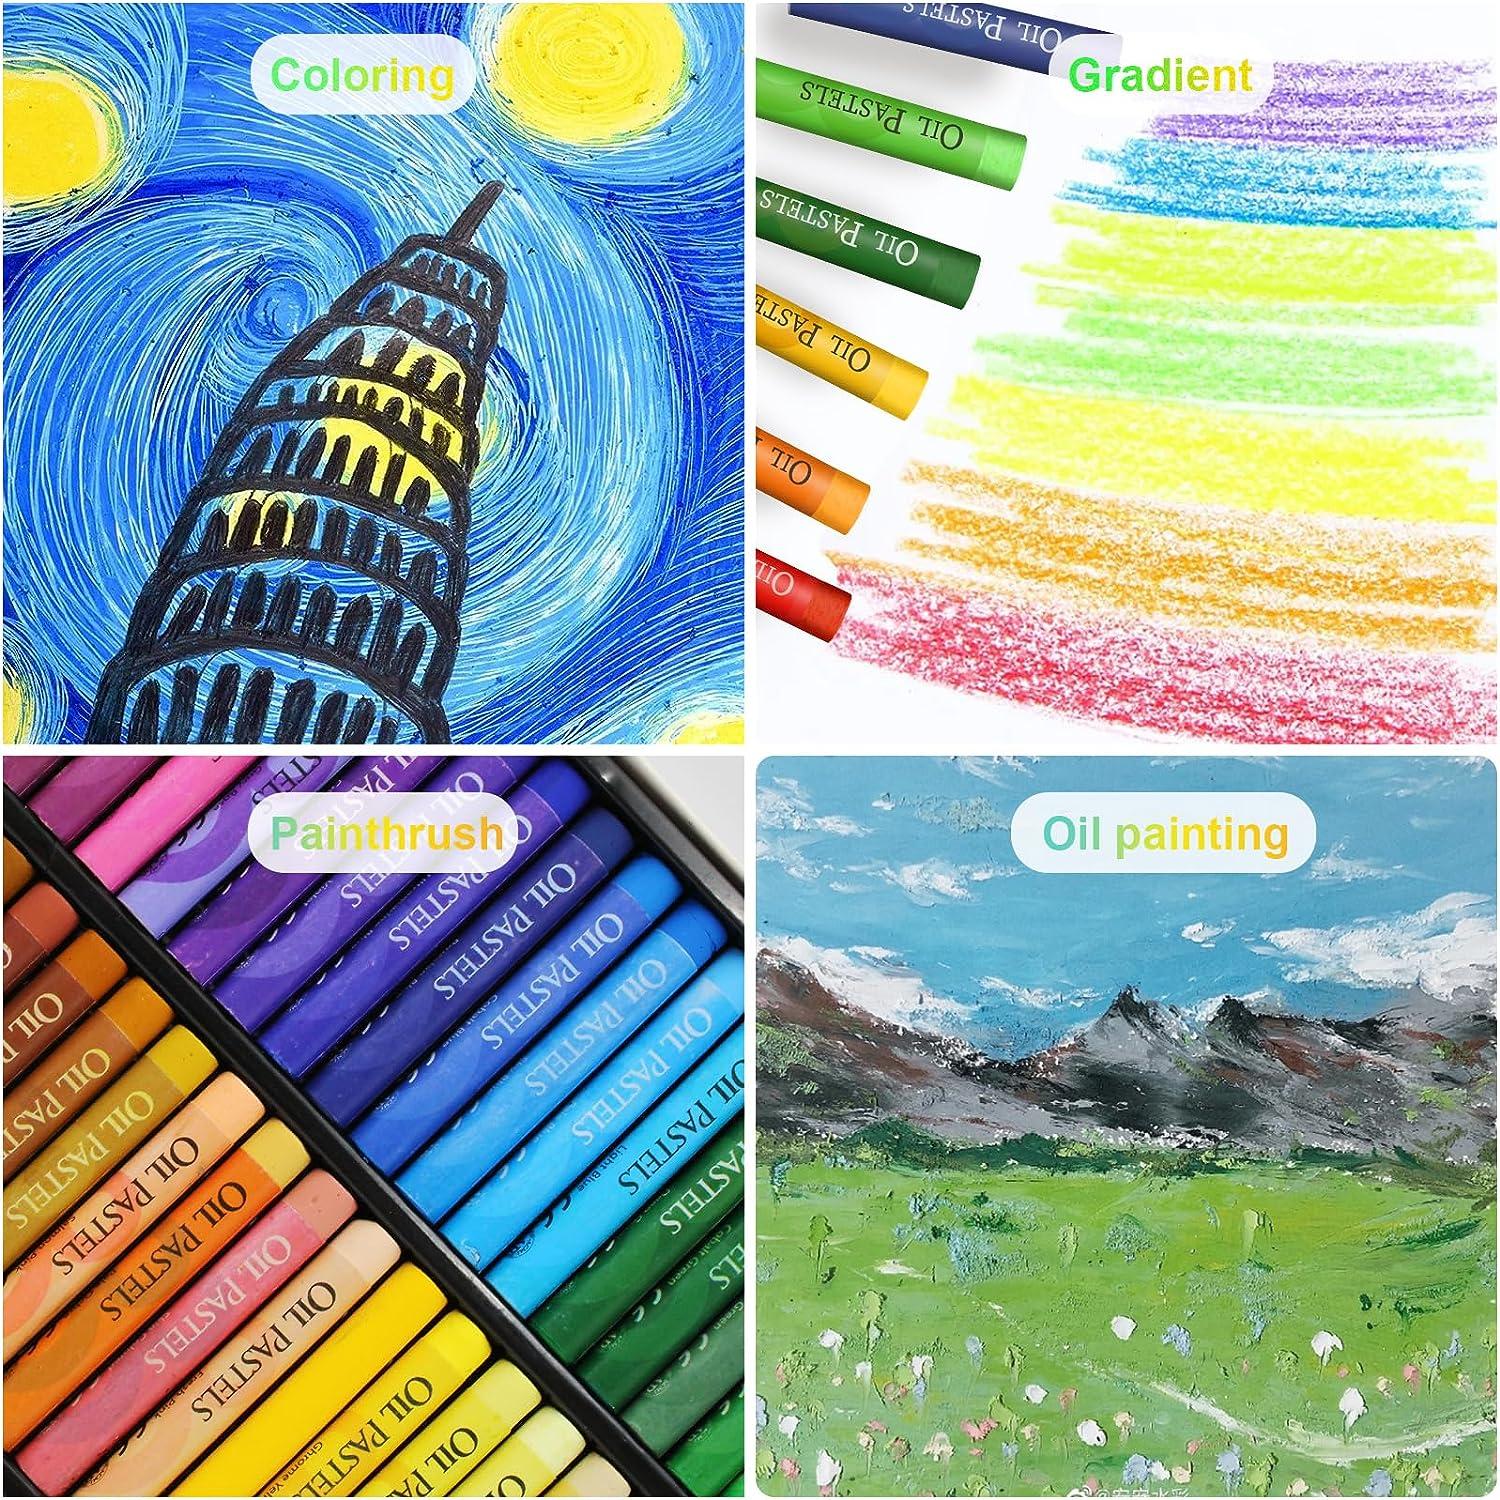 YQSWXZQP Oil Pastels-Crayons-Oil Sticks-Oil Pastels for Kids-Oil paint  sticks-Vibrant Oil Pastels Set for Artists-Perfect for Drawing Painting and  Blending-Ideal for Beginners and Pros Alike.